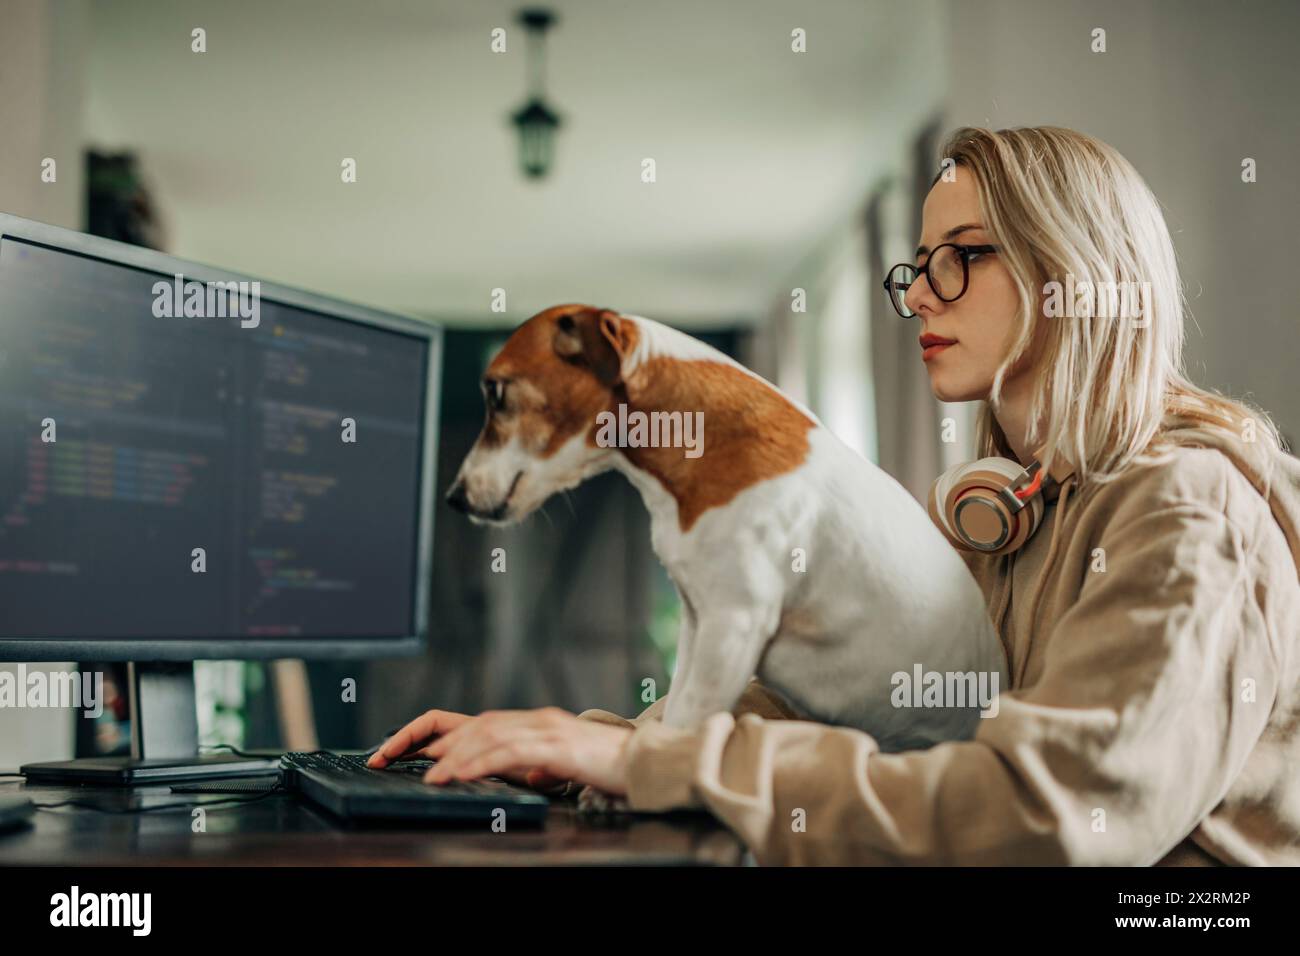 Software programmer coding on computer near dog at home office Stock Photo